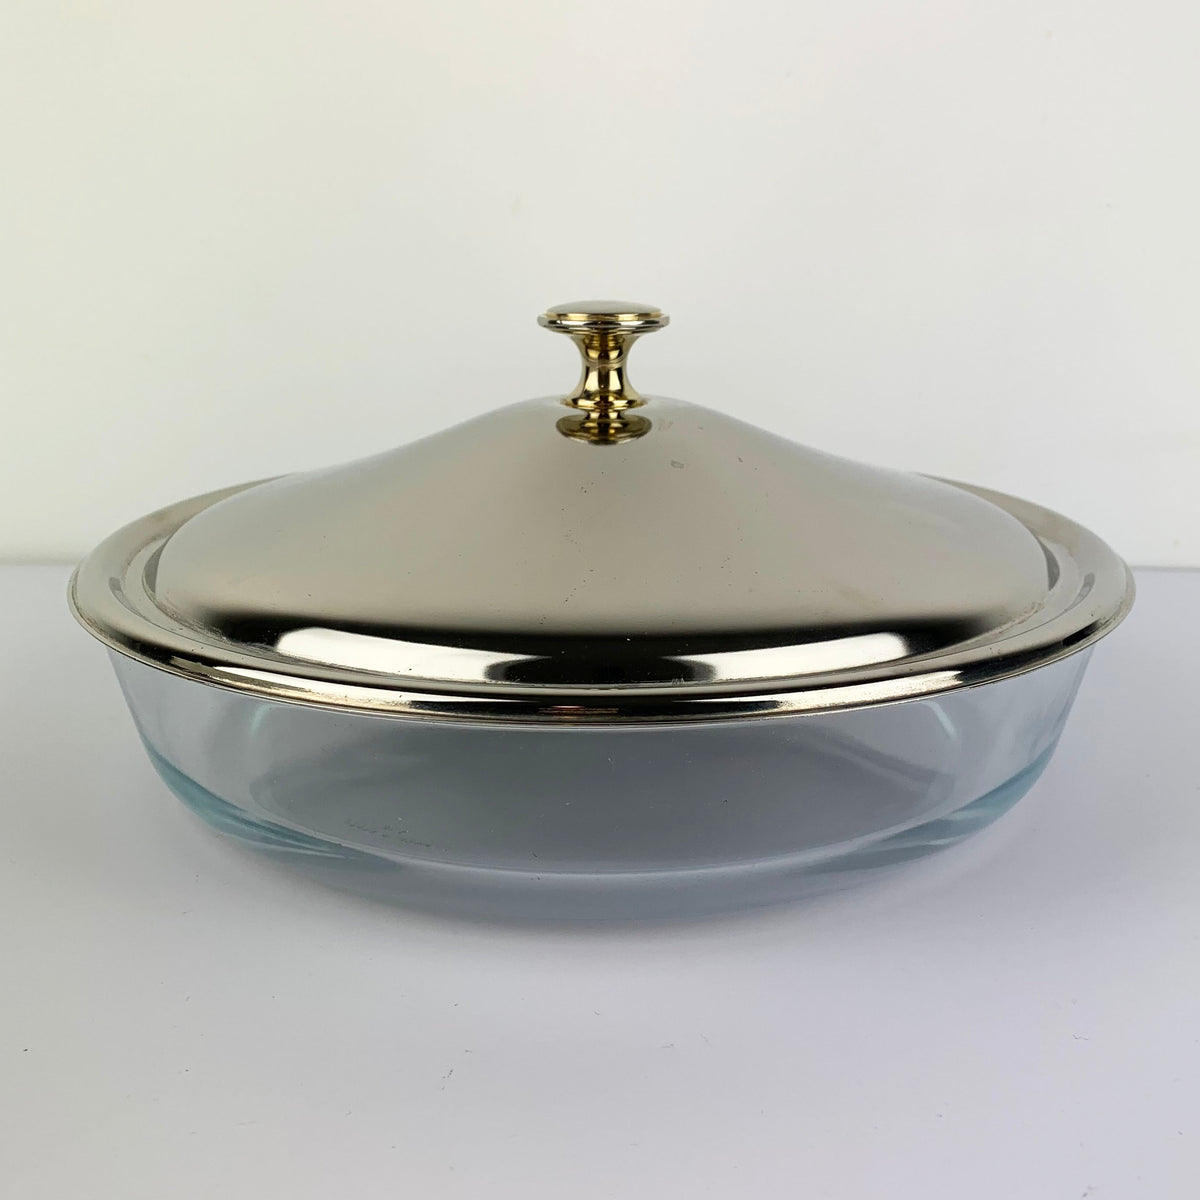 Marinex 3pc Silver Covered Serving Dish, Ornate Handled Lid